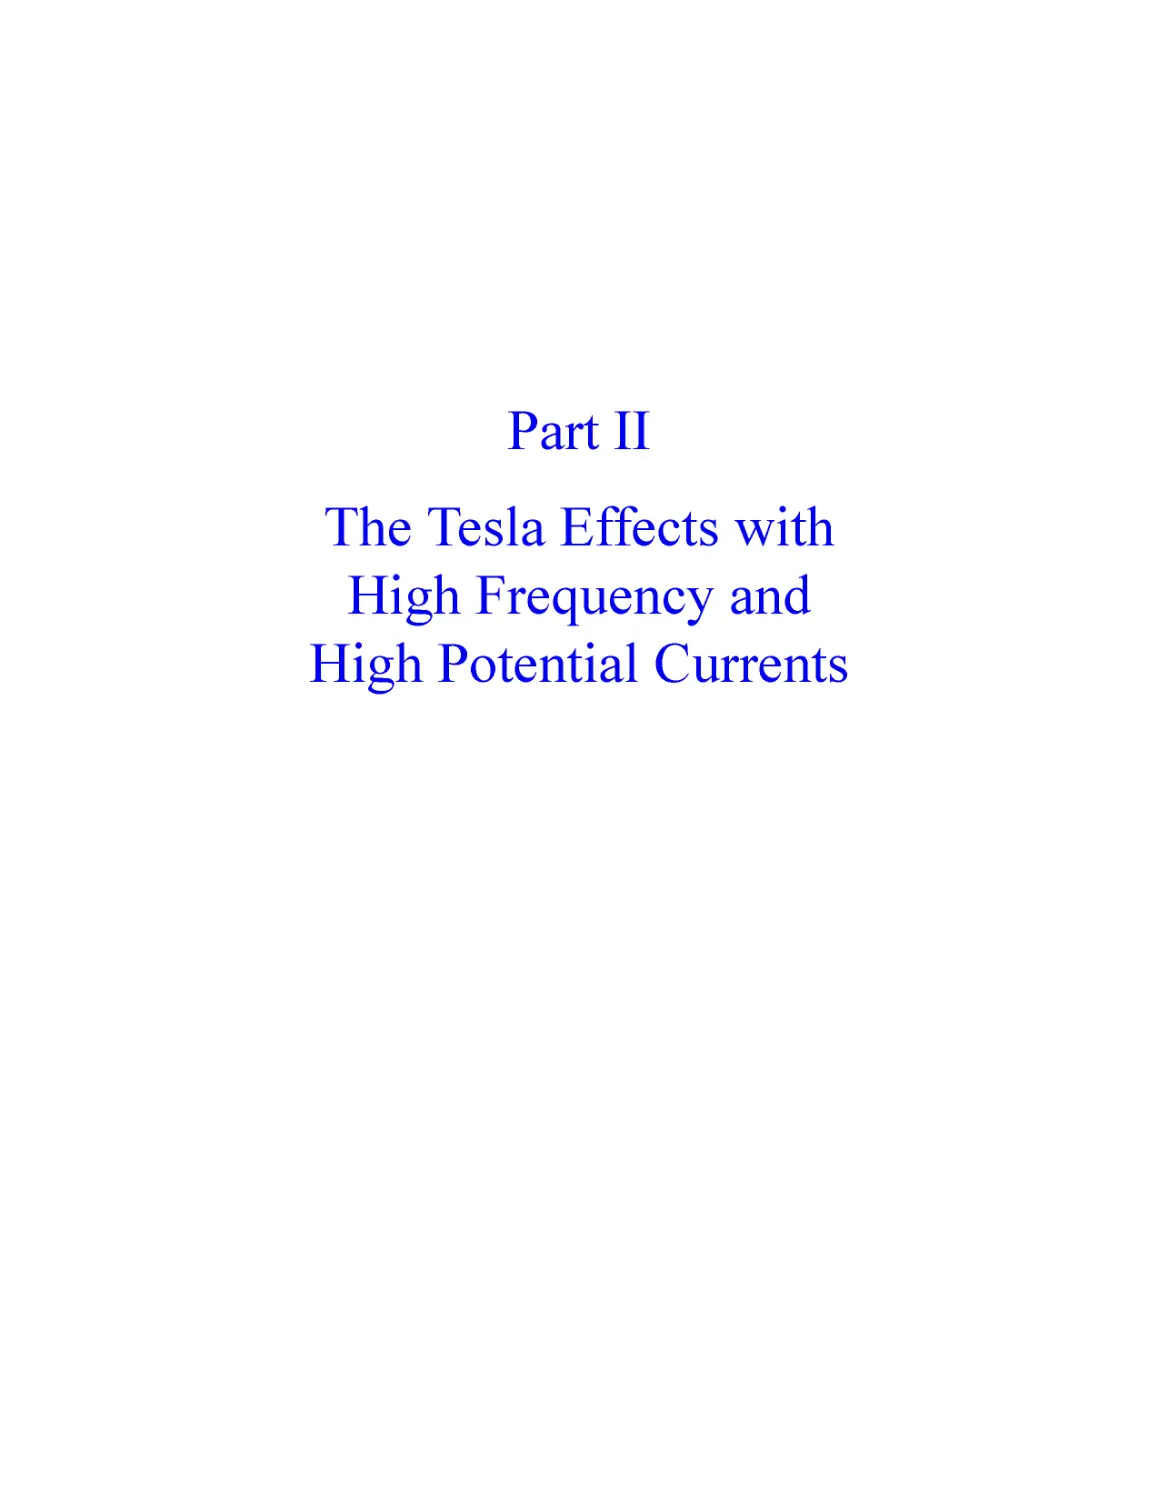 ﻿Part II: The Tesla Effects with High Frequency and High Potential Current